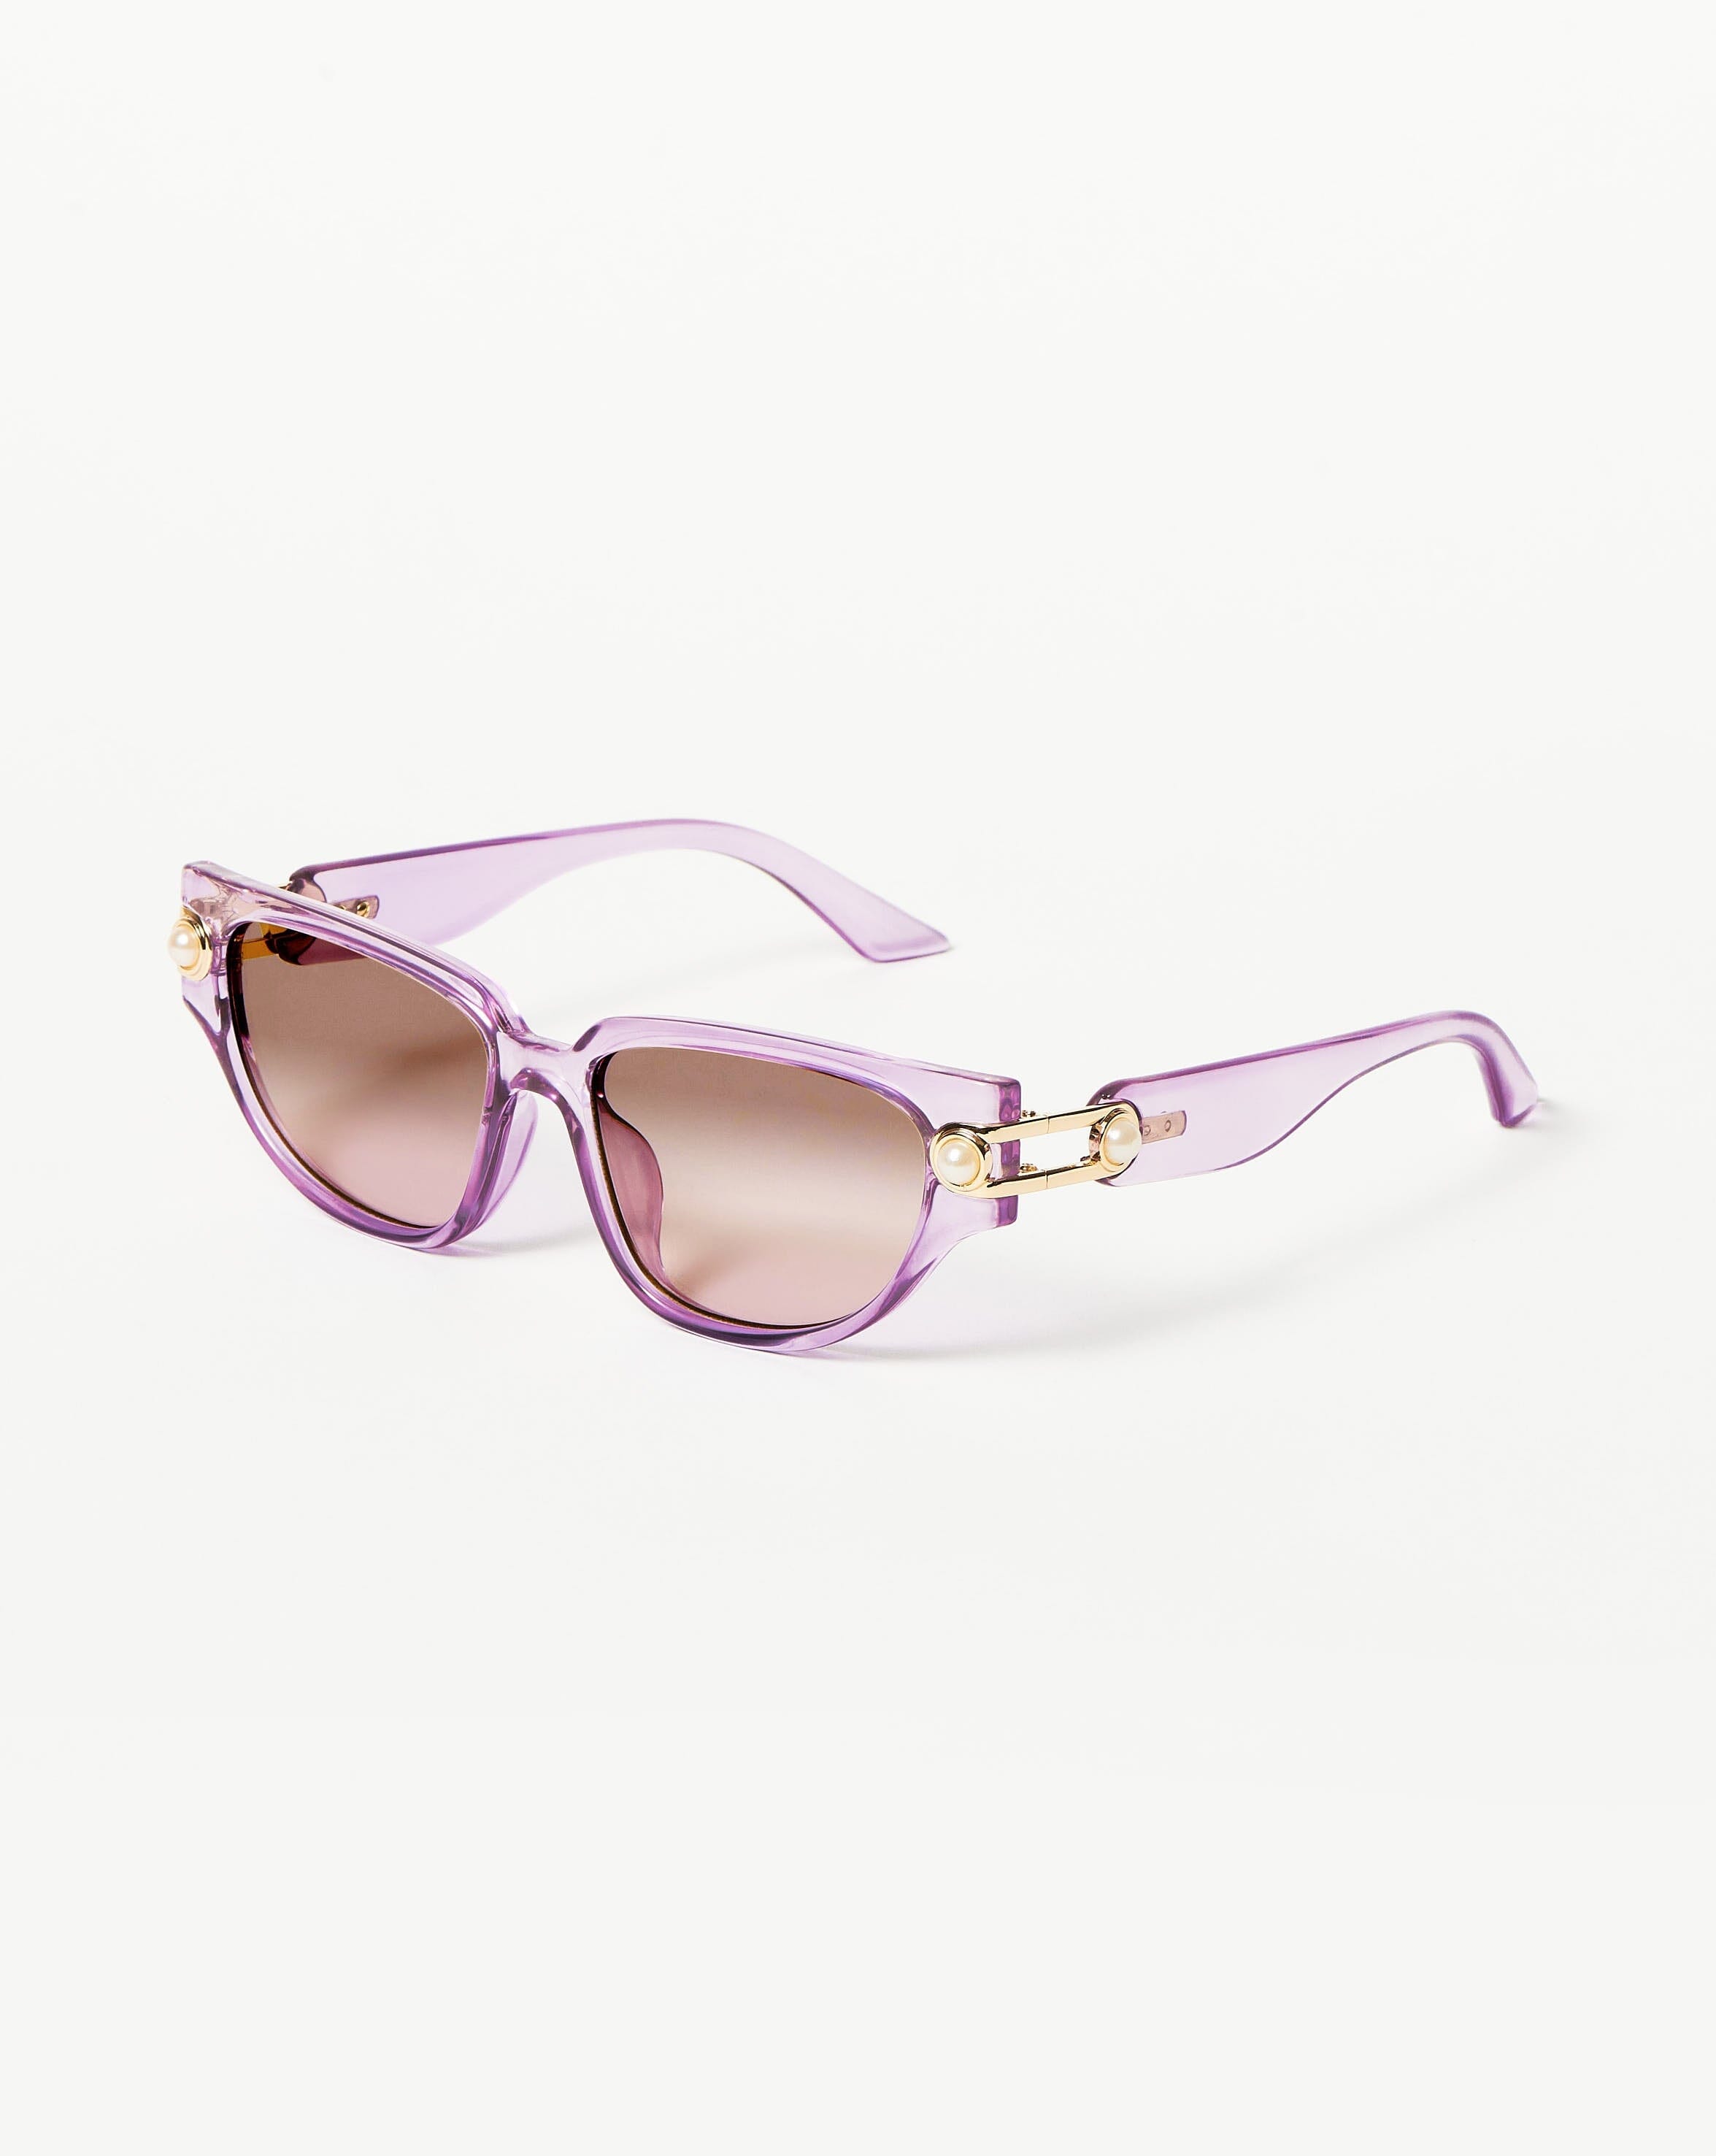 MISSOMA x LE SPECS SERPENS LINK SUNGLASSES TORTOISE WITH PEARL